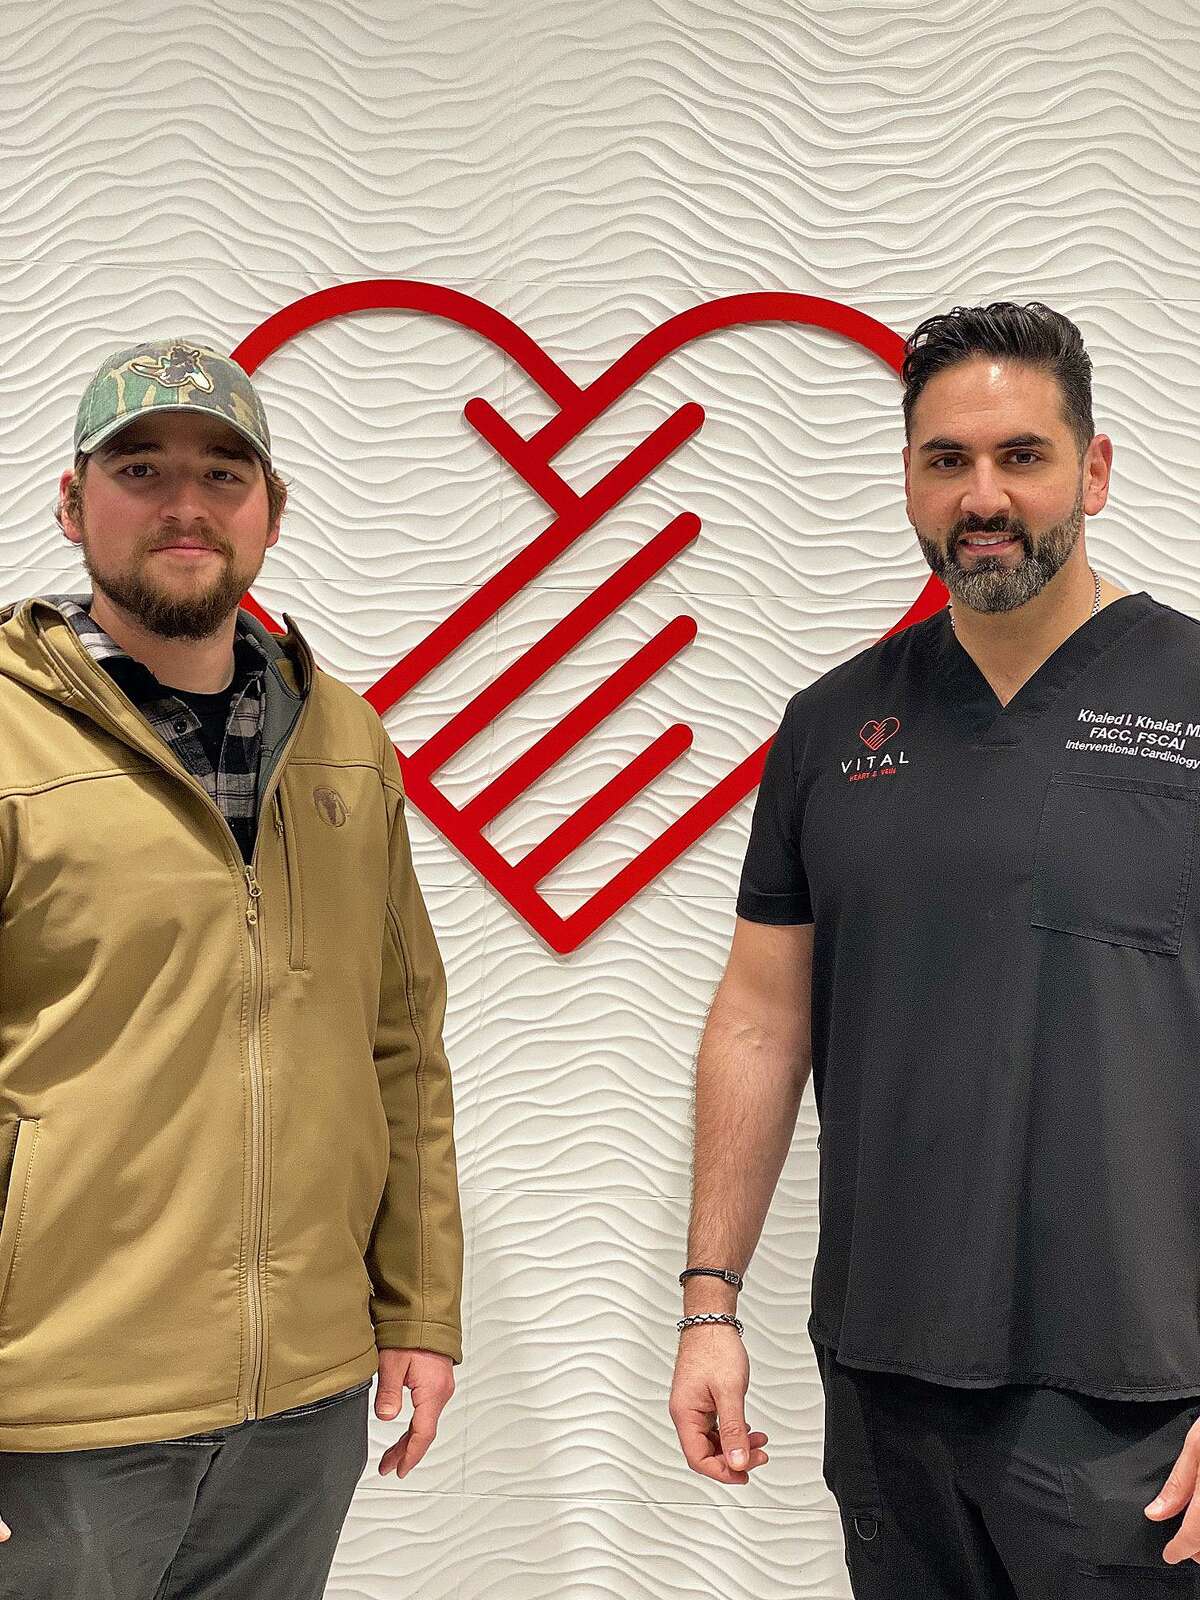 Doctor and patient reunite following the life-saving procedure. Trent Strickland, left, thanks Dr. Khaled Khalaf of Vital Heart and Vein for his surgery that opened the blockage in his leg that caused his leg to swell up twice as large as normal.